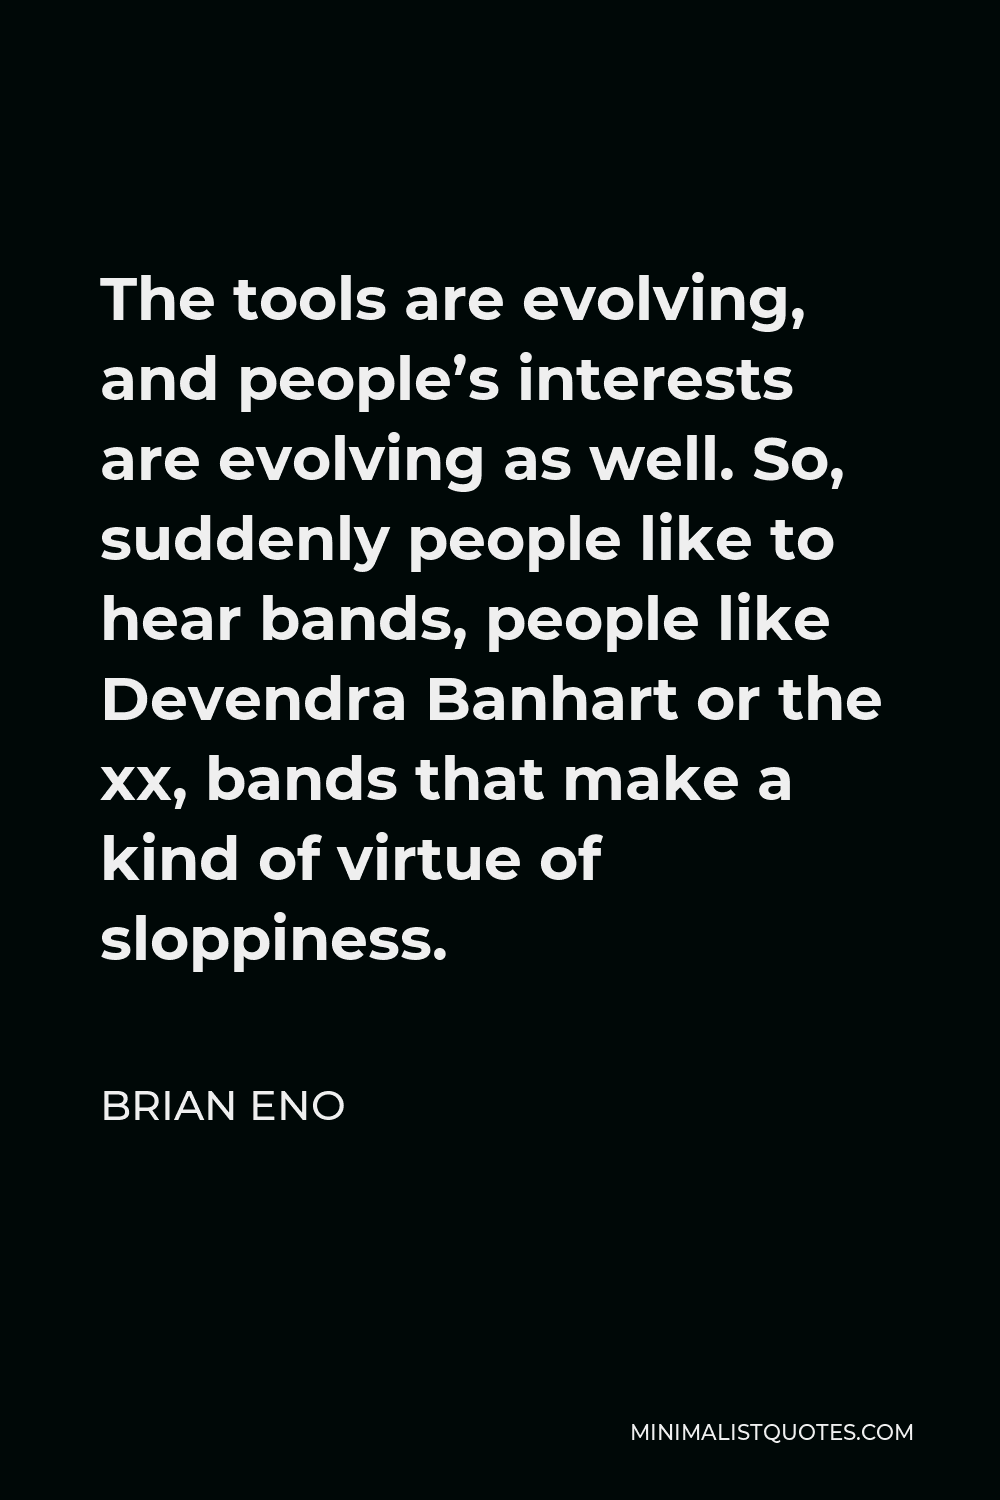 Brian Eno Quote - The tools are evolving, and people’s interests are evolving as well. So, suddenly people like to hear bands, people like Devendra Banhart or the xx, bands that make a kind of virtue of sloppiness.